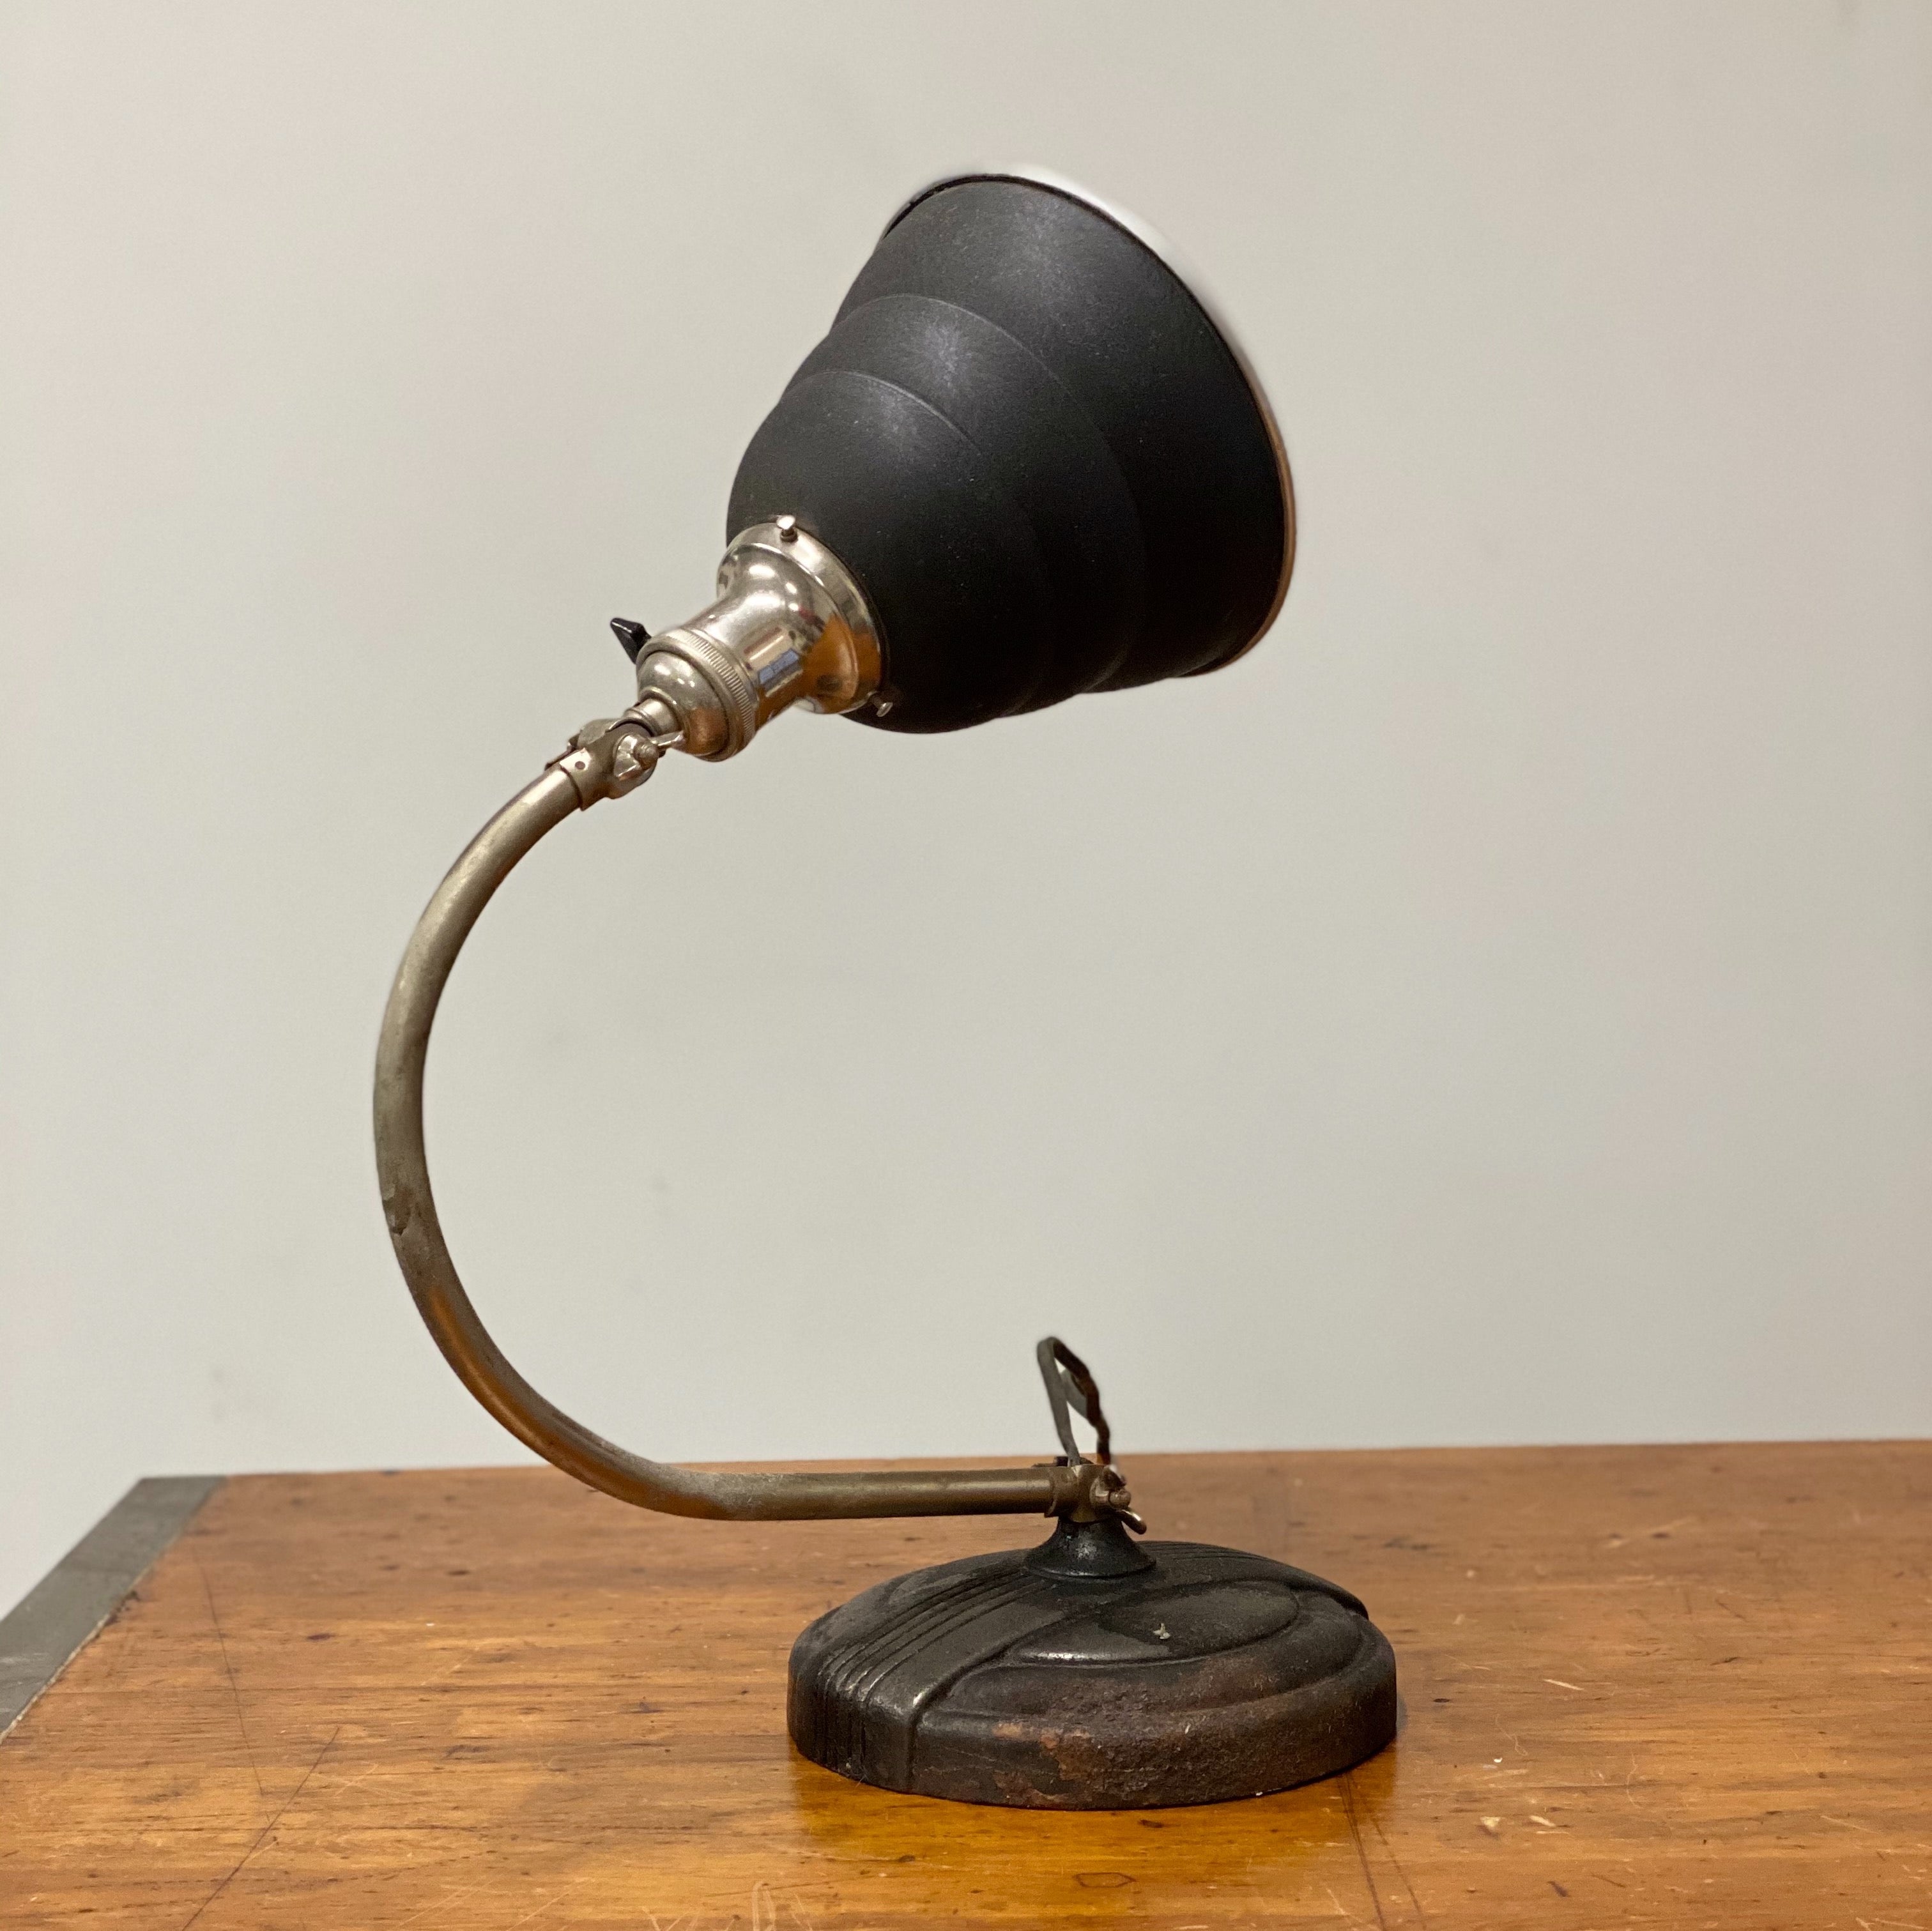 High view of Vintage Articulating Desk Lamp with Unusual Shade - General Electric - Rare Art Deco Light - Decor - Black and Tan - Antique Lighting